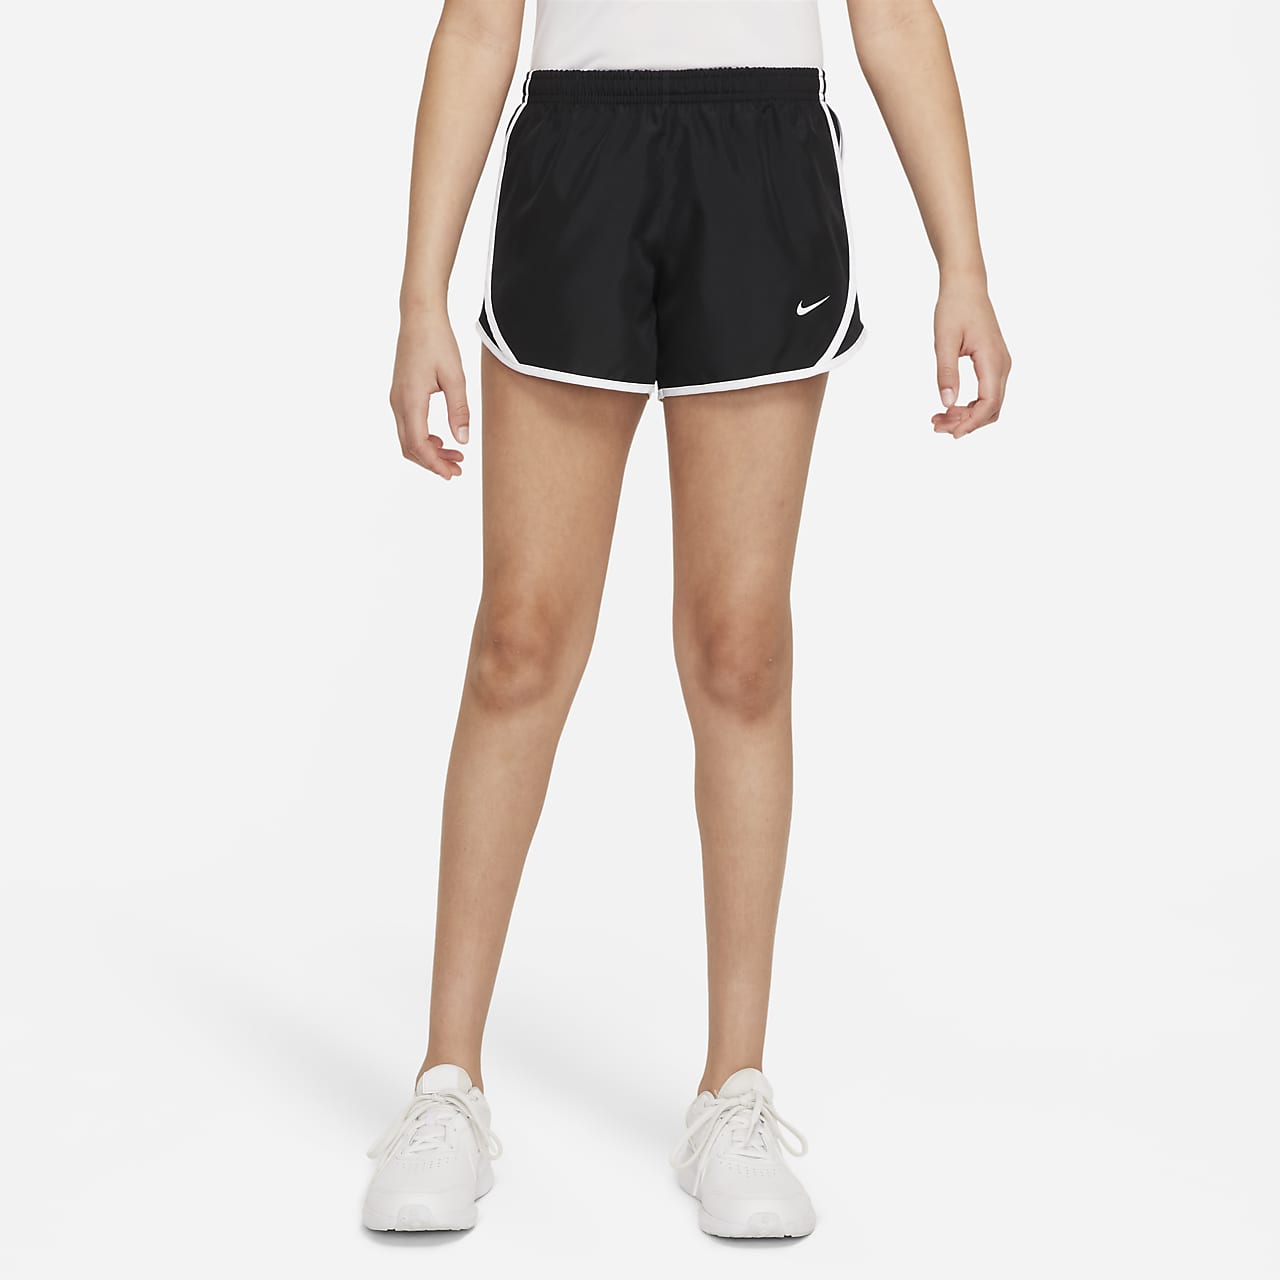 Image result for running shorts nike